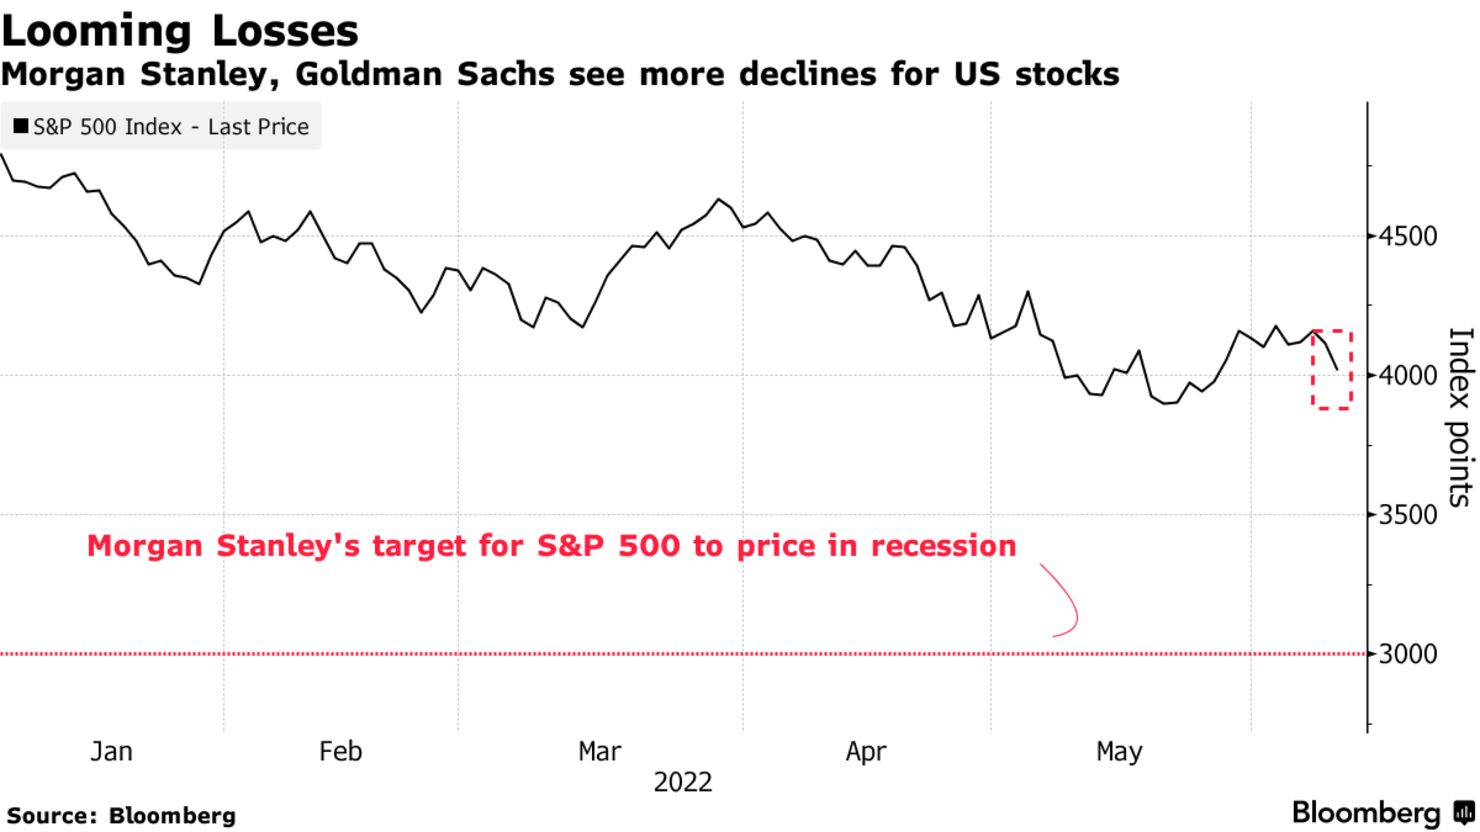 Morgan Stanley, Goldman Sachs see more declines for US stocks